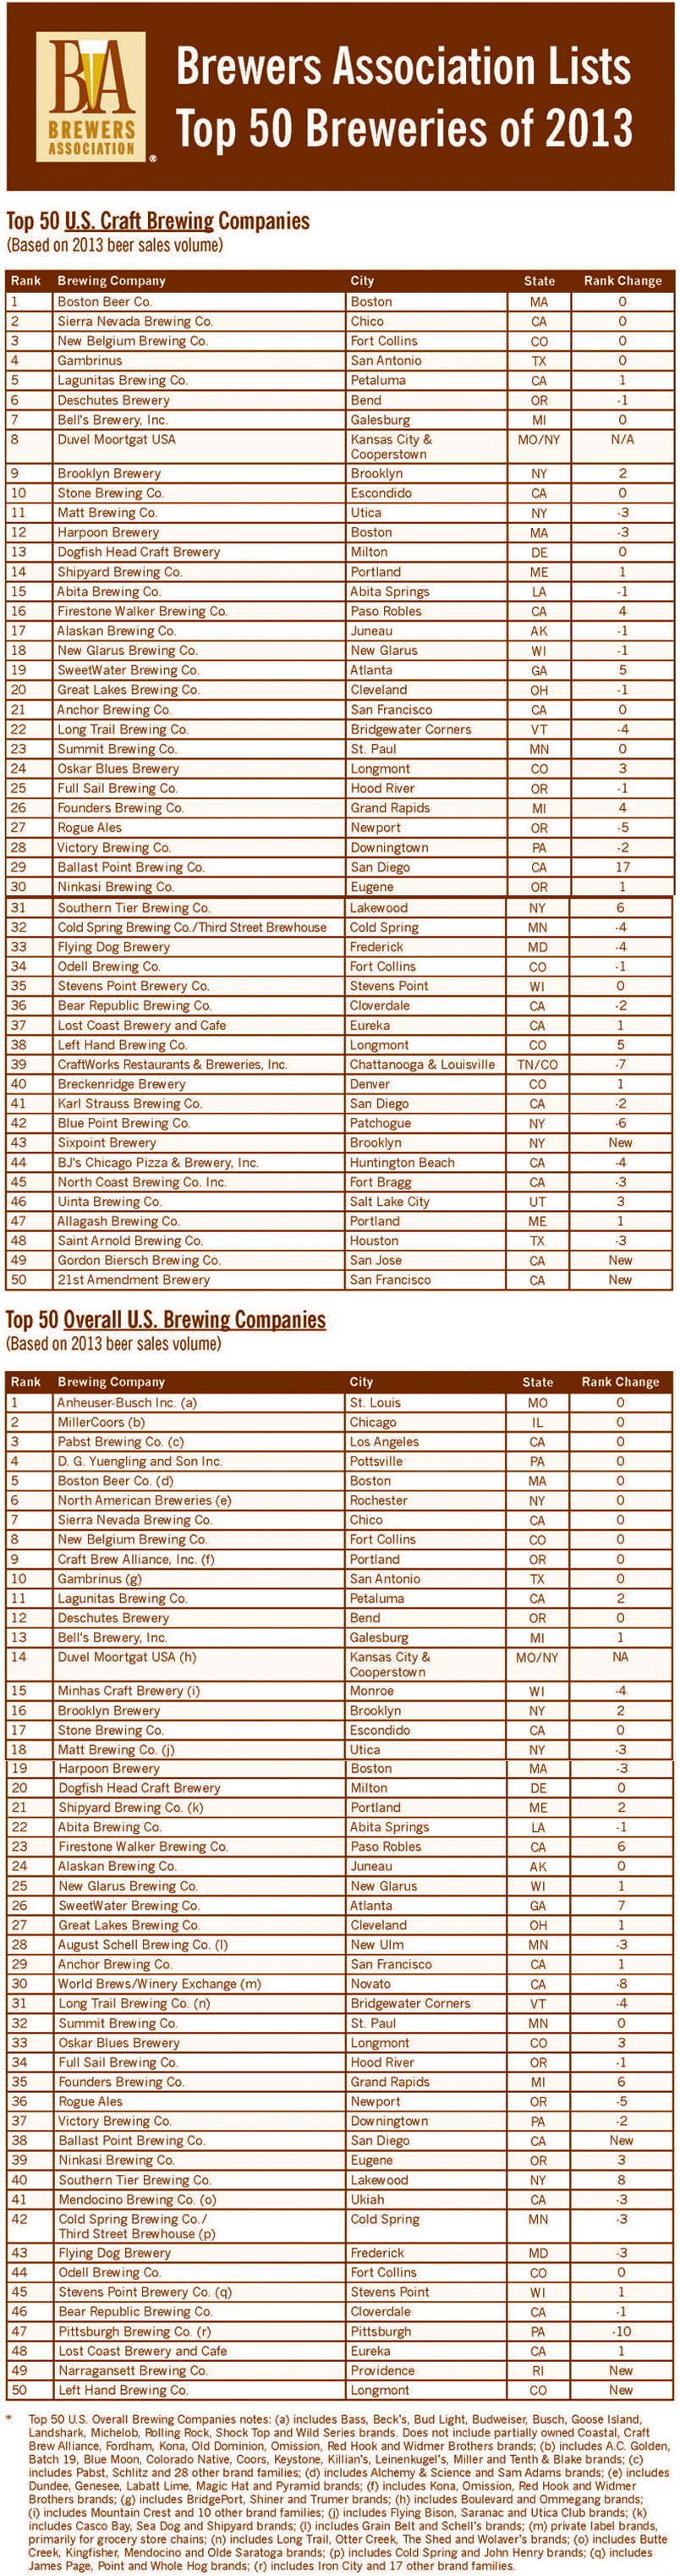 2013-Top-50-Brewery-List